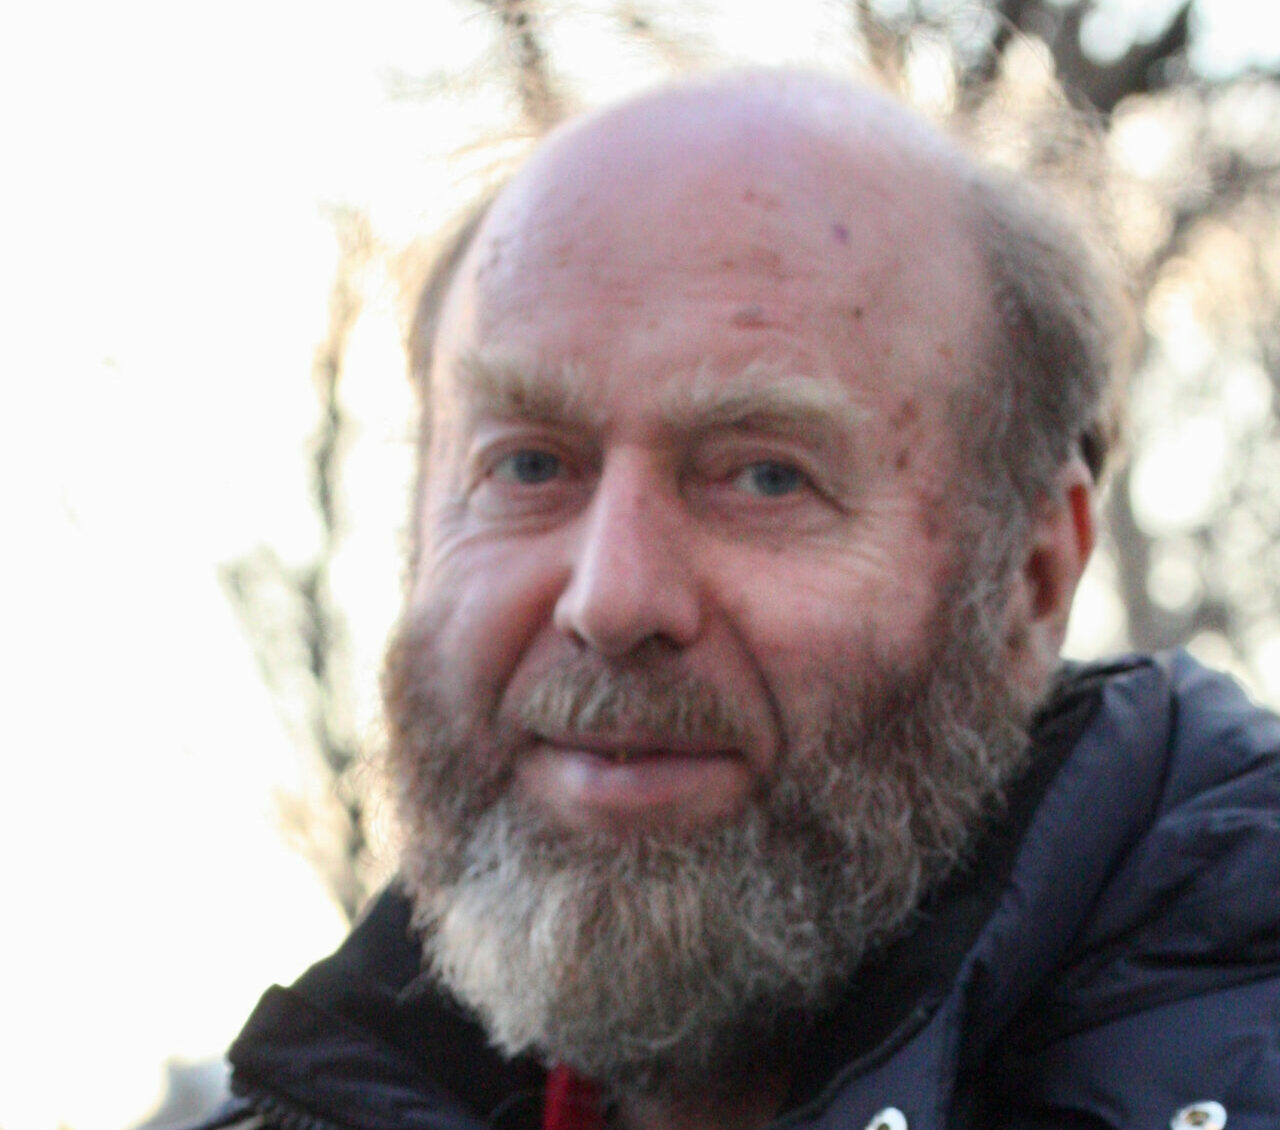 A photograph of a bald man with a bushy gray beard standing tilted away from the camera in a thick jacket